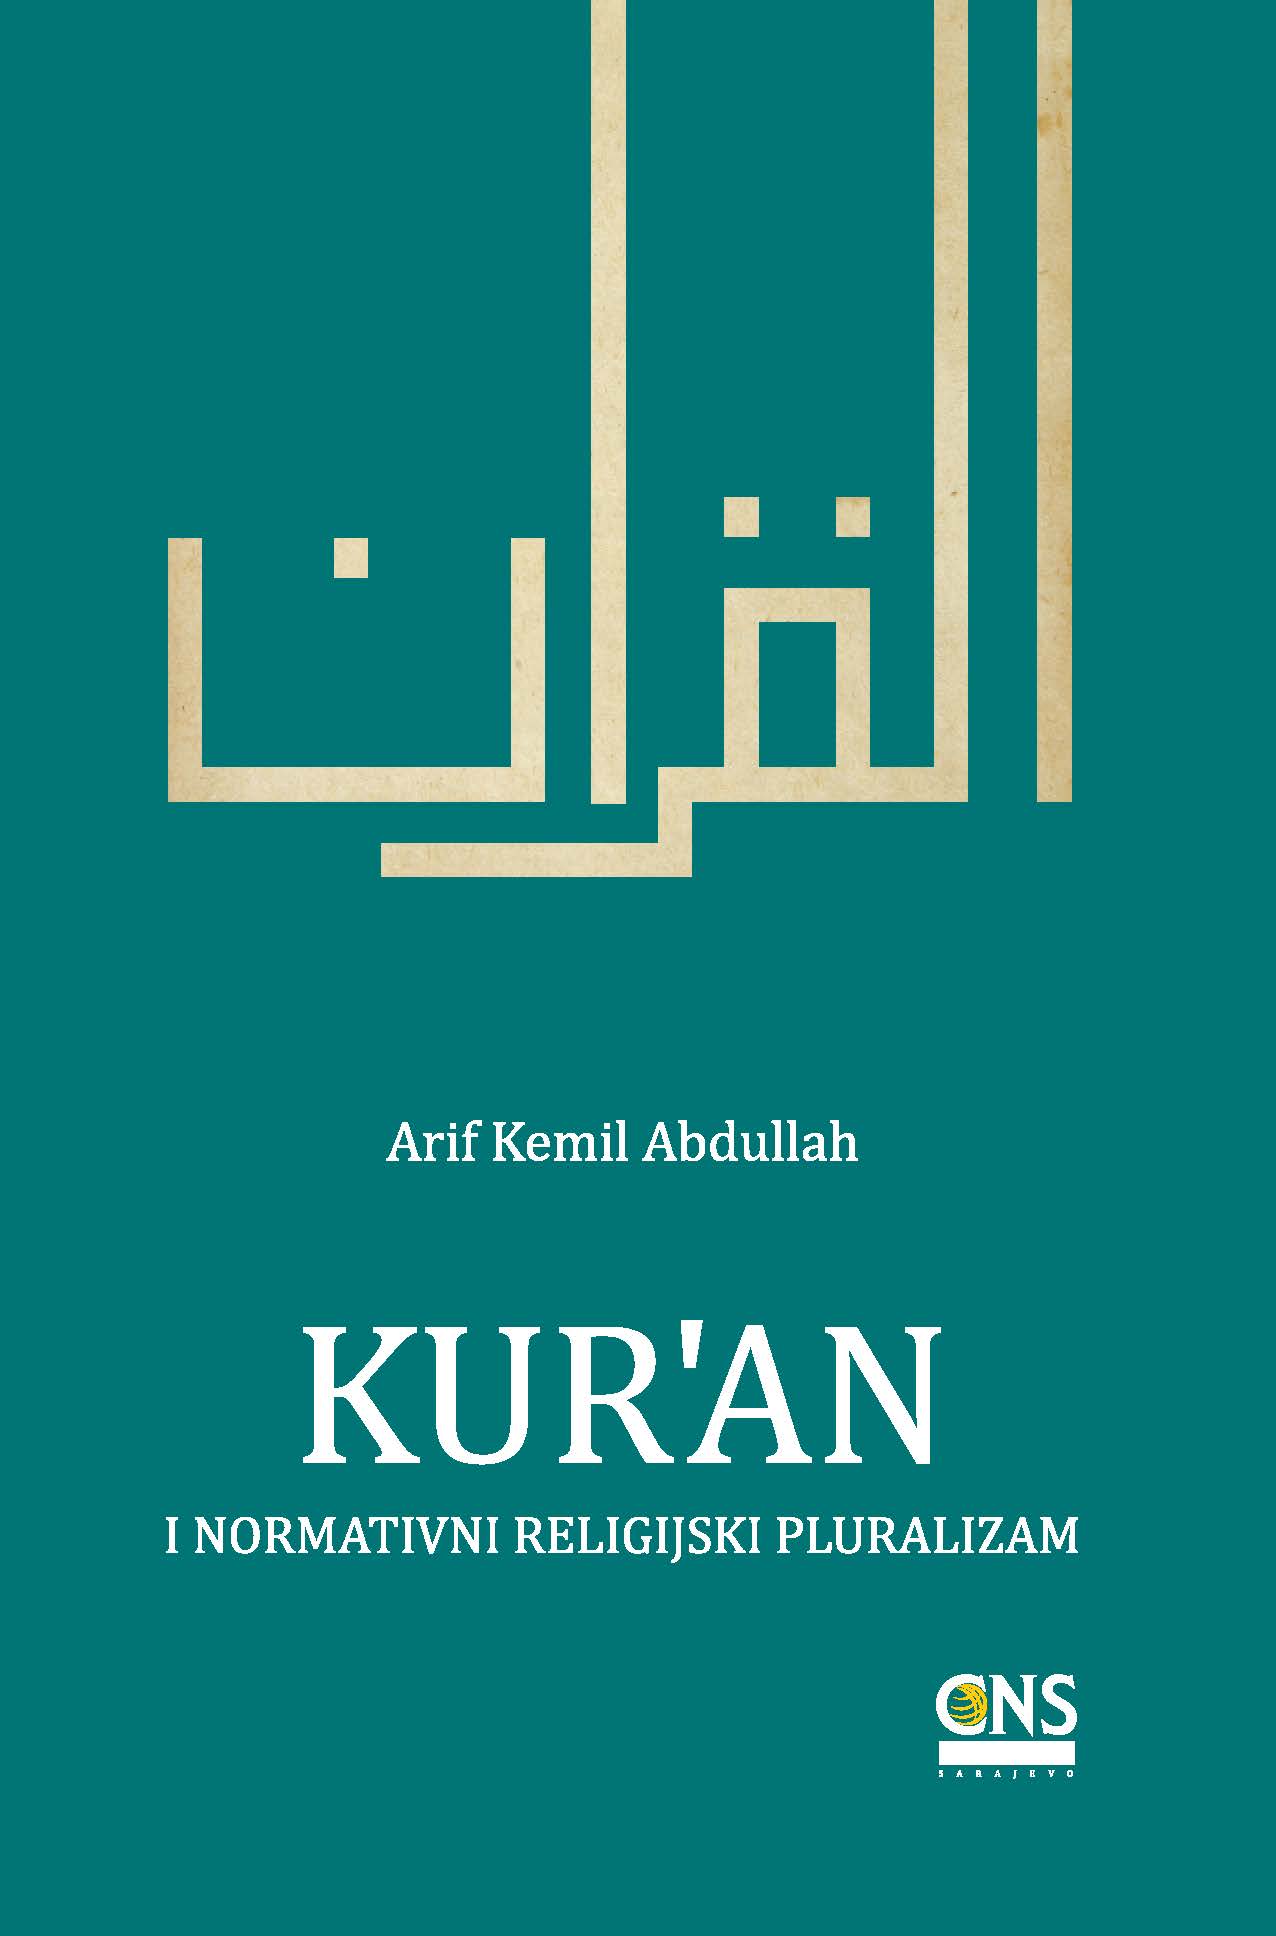 Bosnian: The Qur’an and Normative Religious Pluralism: A Thematic Study of the Qur’an